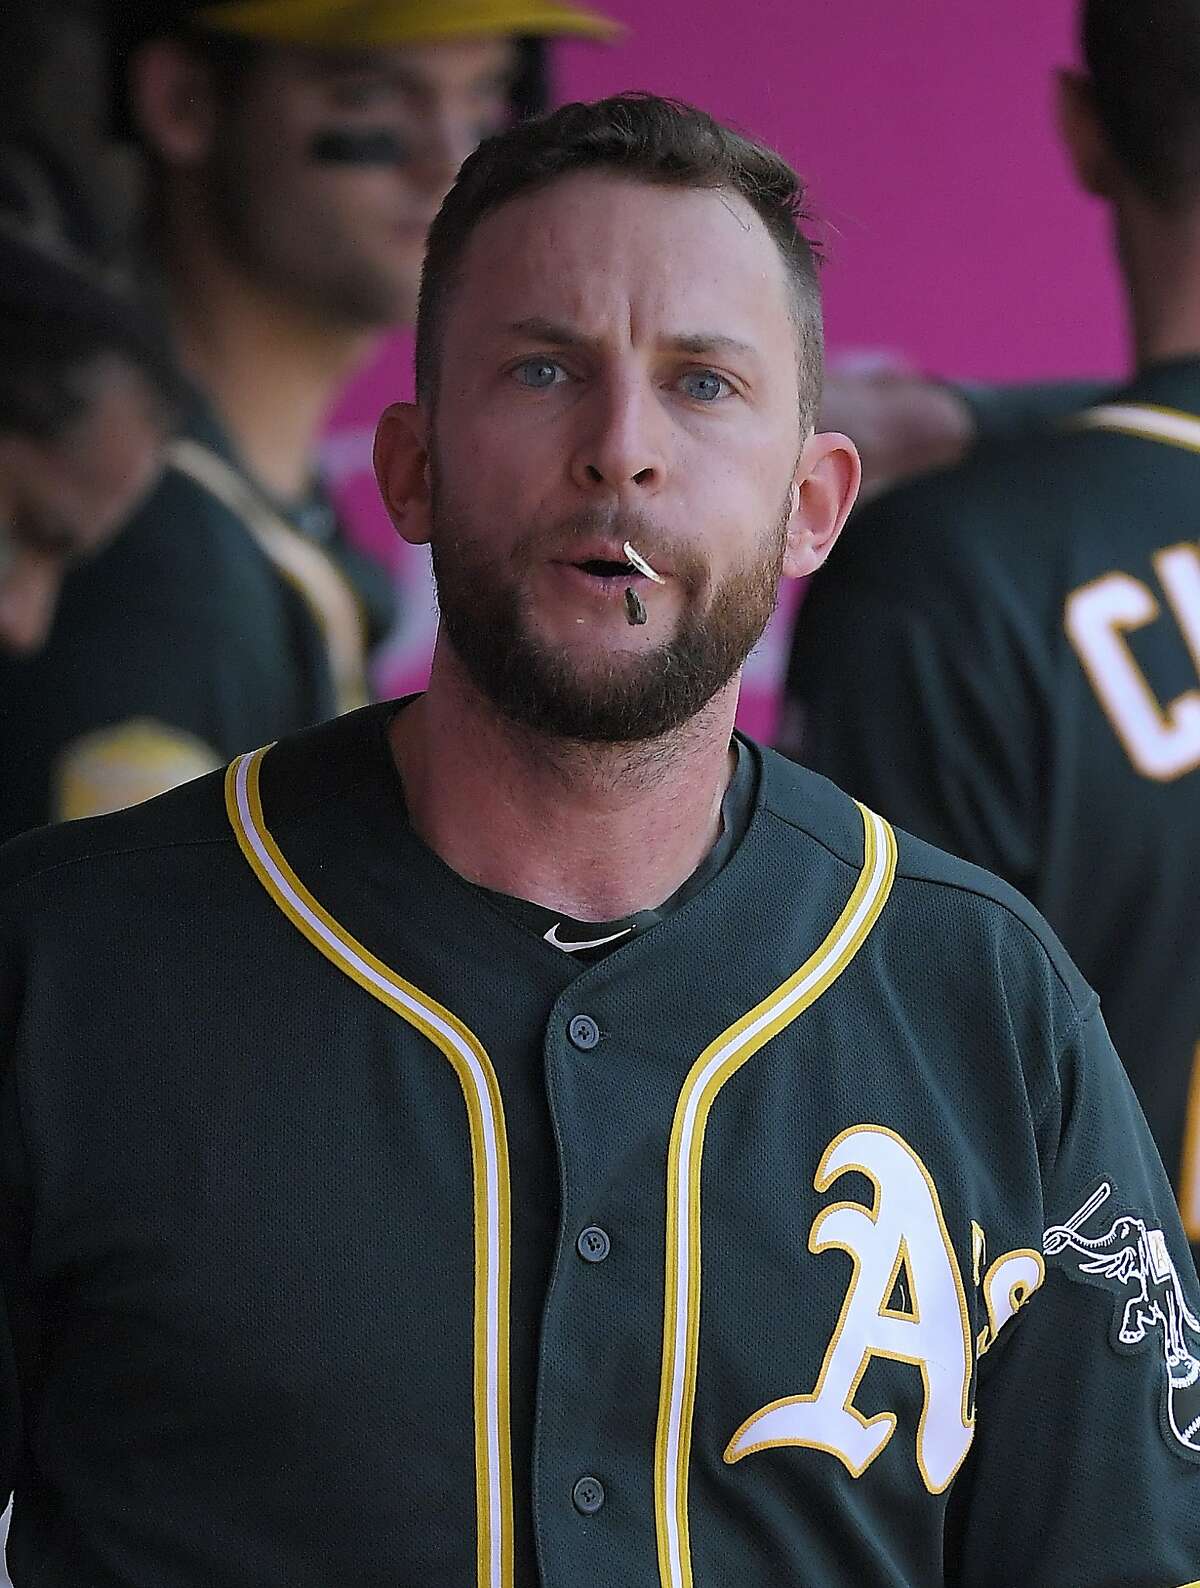 Oakland Athletics' Jed Lowrie spits seeds in the dugout during the first inning of a baseball game against the Los Angeles Angels Sunday, Aug. 12, 2018, in Anaheim, Calif. (AP Photo/Mark J. Terrill)